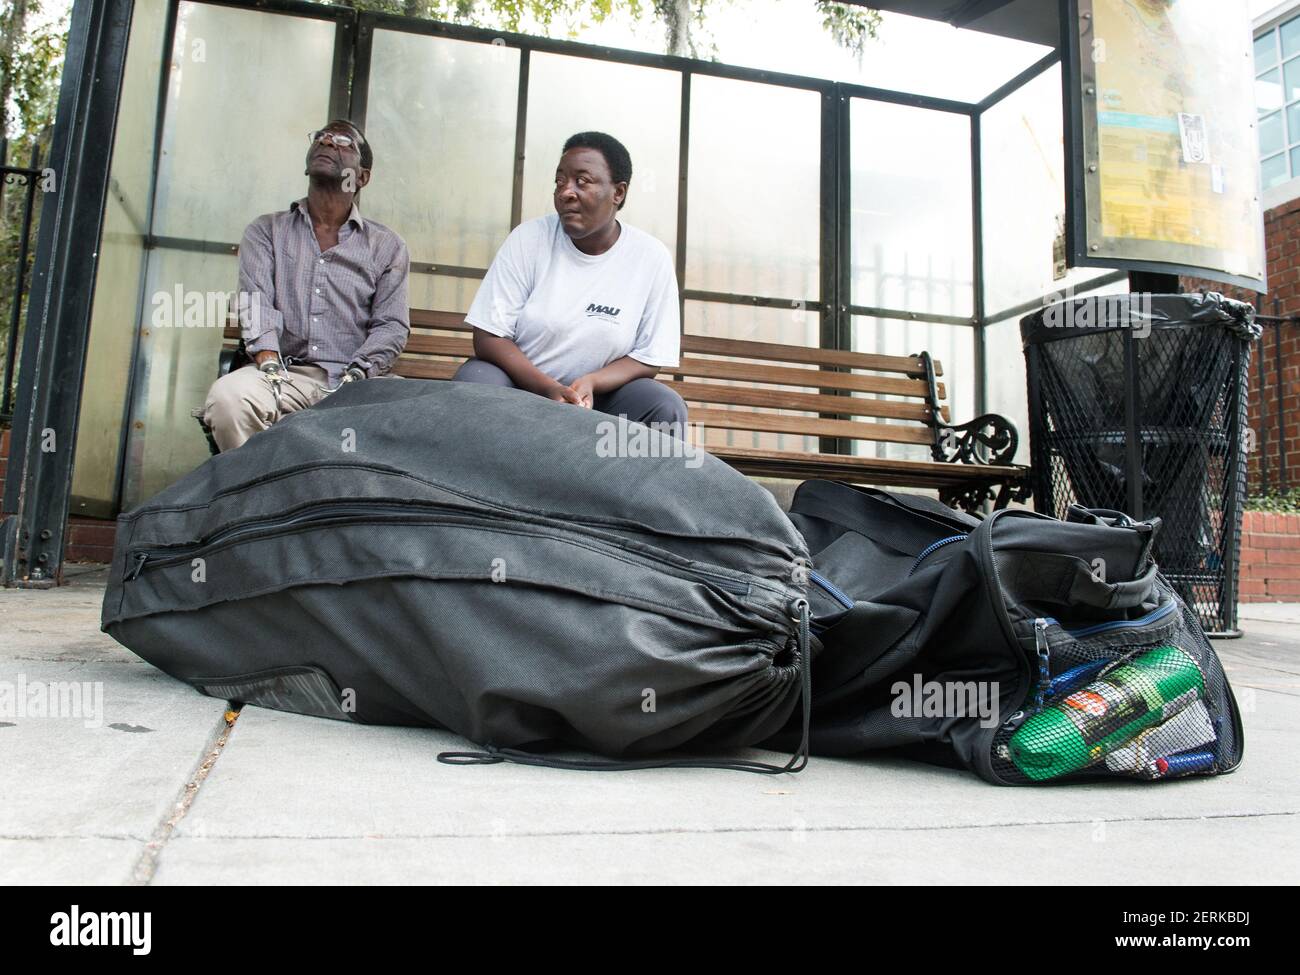 Sep 12, 2018; Charleston, SC; Henry Wright, 60, (left) waits in downtown Charleston at a Charleston Area Regional Transportation Authority (CARTA) bus stop which serves as a Hurricane Evacuation Bus Stop picking up people needing transport to the Charleston County Government Complex to be evacuated on buses to locations further inland such as Columbia, SC prior to Hurricane Florence making landfall along the East Coast. Mandatory Credit: Jack Gruber-USA TODAY/Sipa USA *** NO TABLOIDS *** Stock Photo